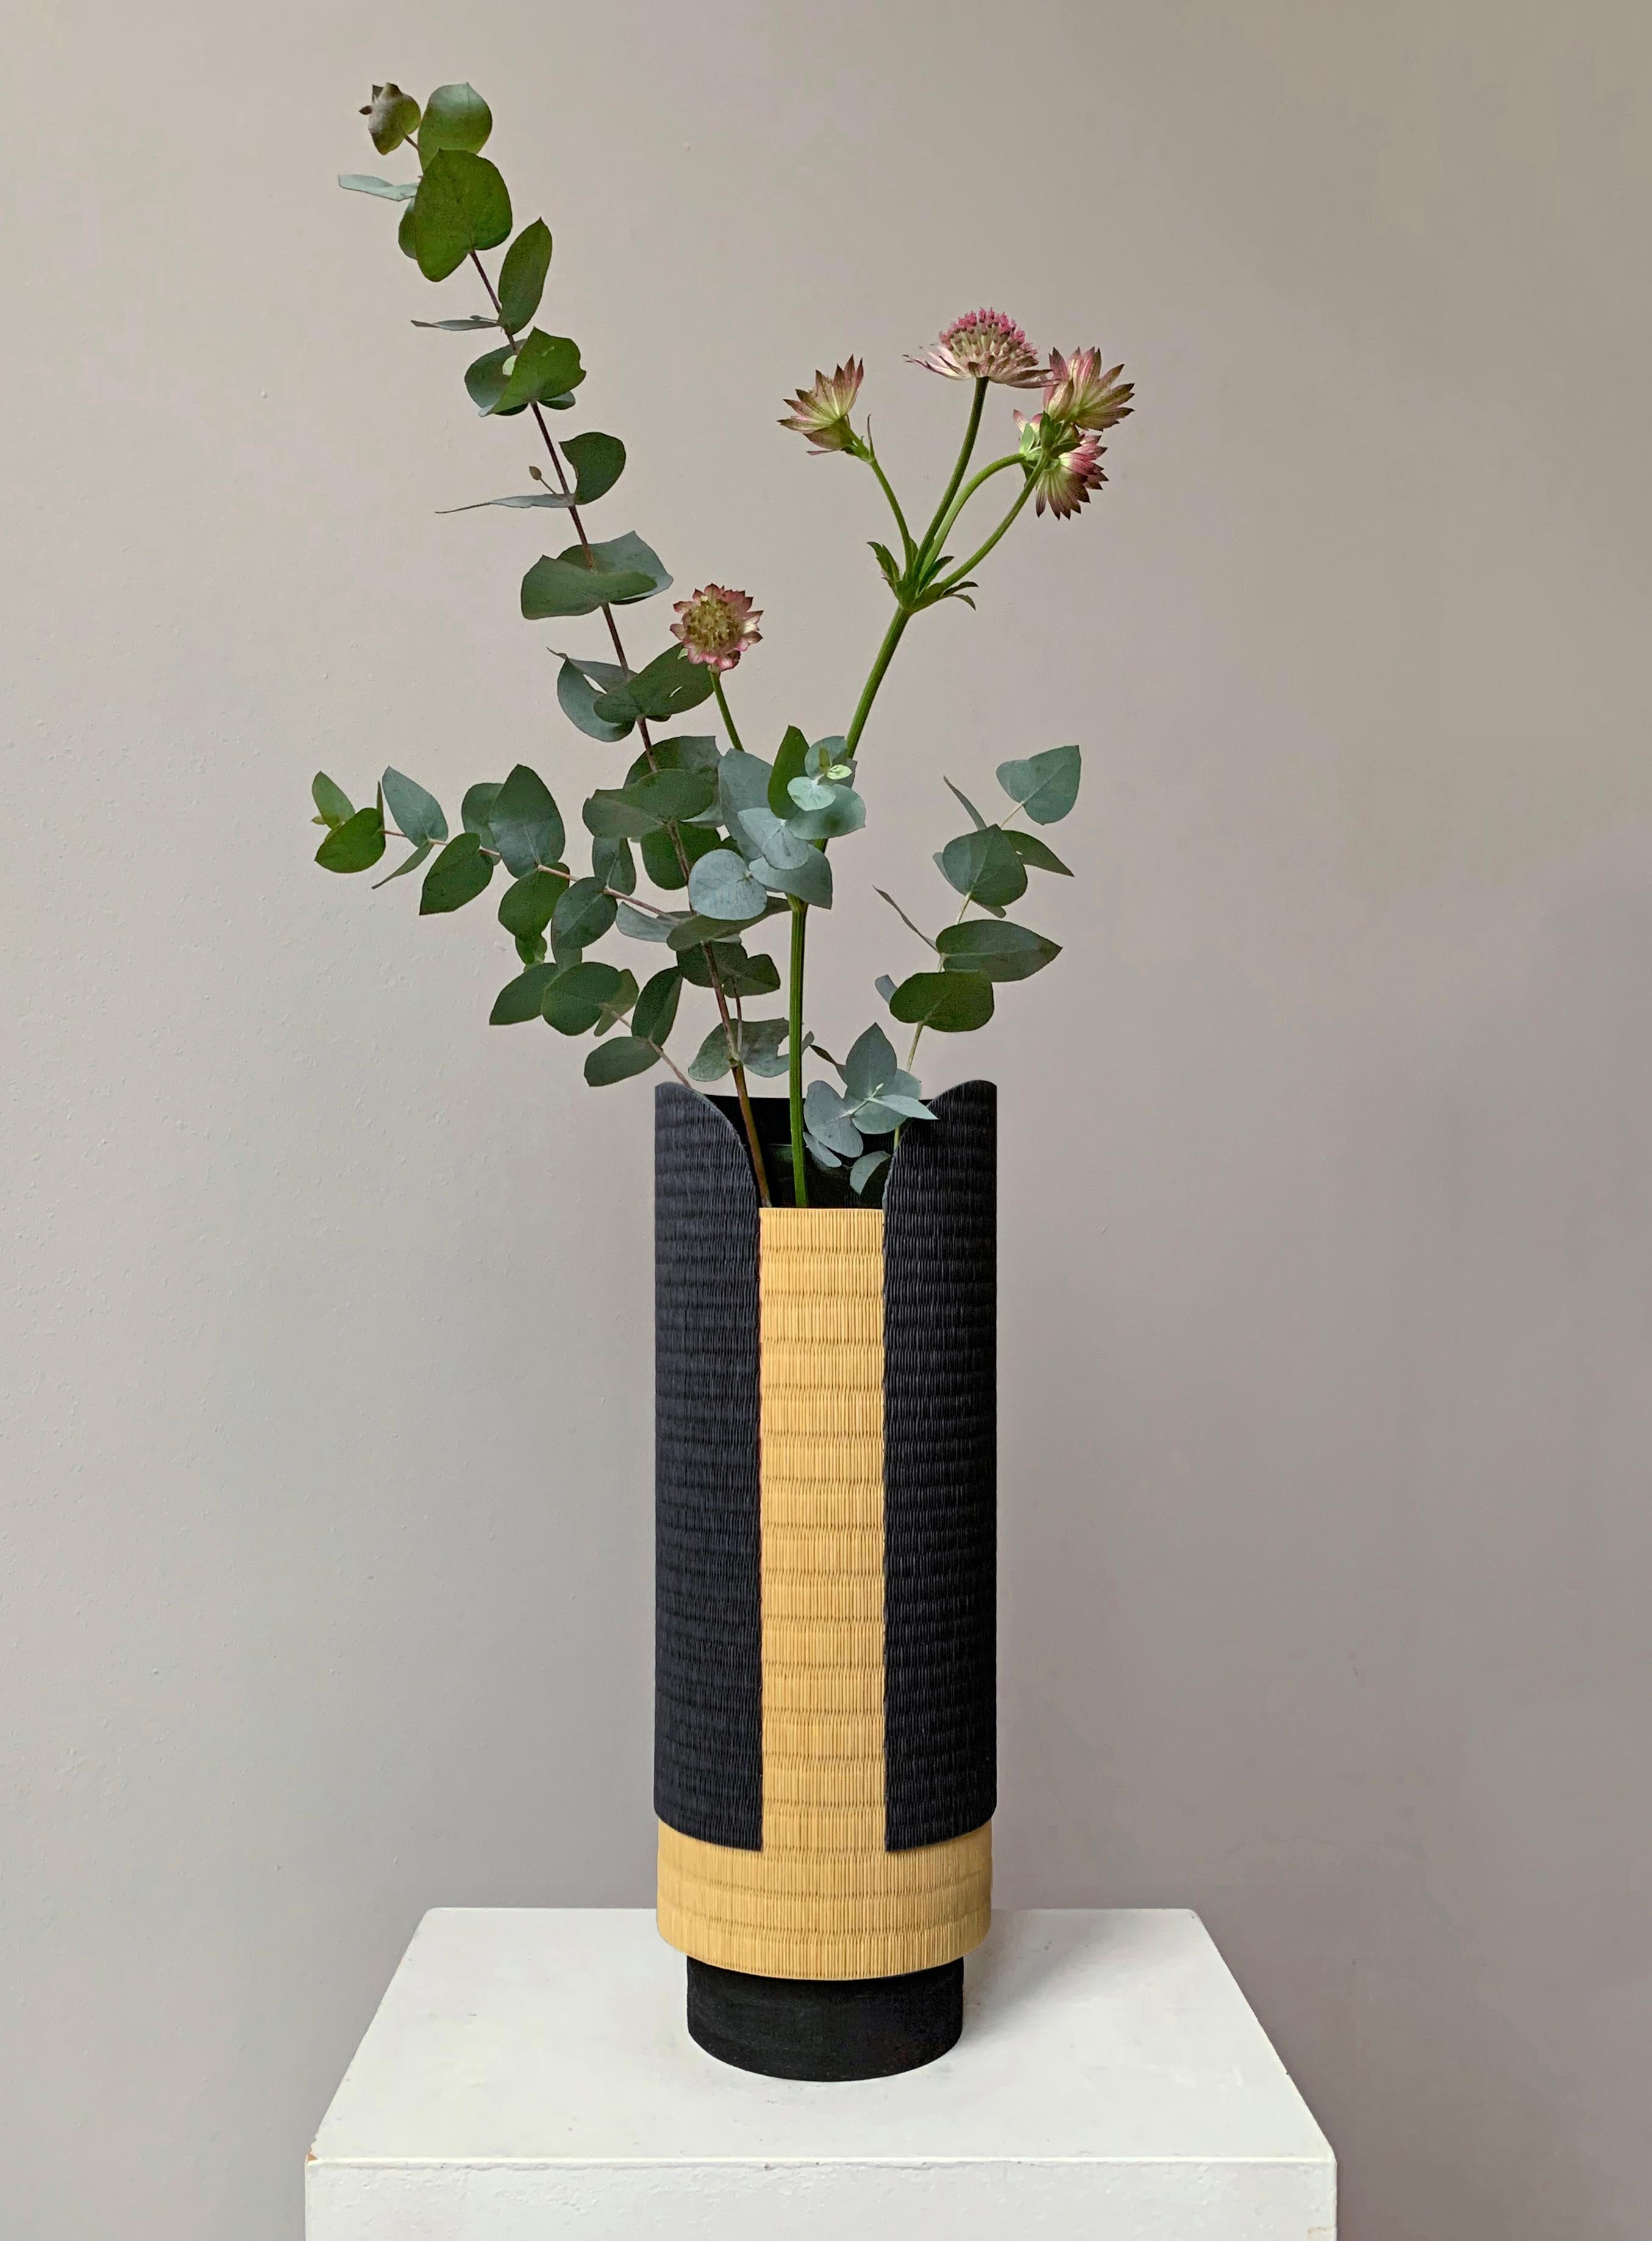 Shizen vase by Astrid Hauton
Dimensions: D 11.5 x H 32 cm
Materials: Woven washi paper, waxed black Valchromat.

« Shizen », in Zen tradition, refers to nature as it includes human beings. The Shizen vase has been
designed to embody the natural